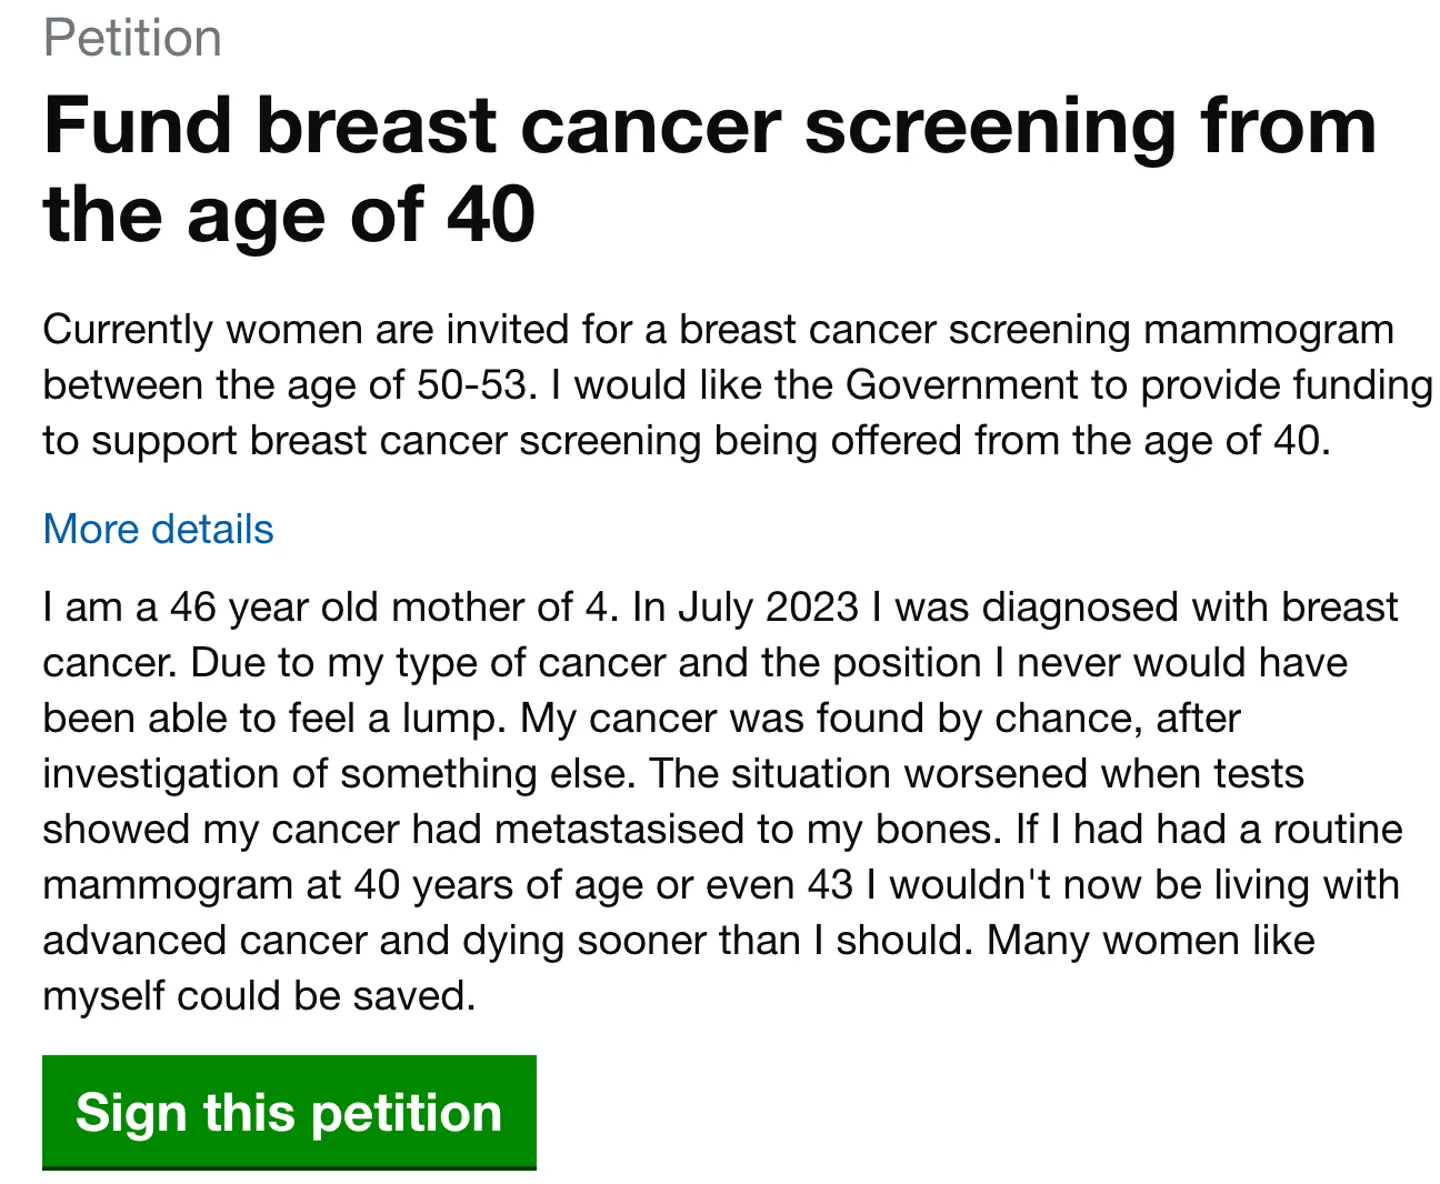 Lucy has launched a petition calling for the age of breast cancer screening to be lowered